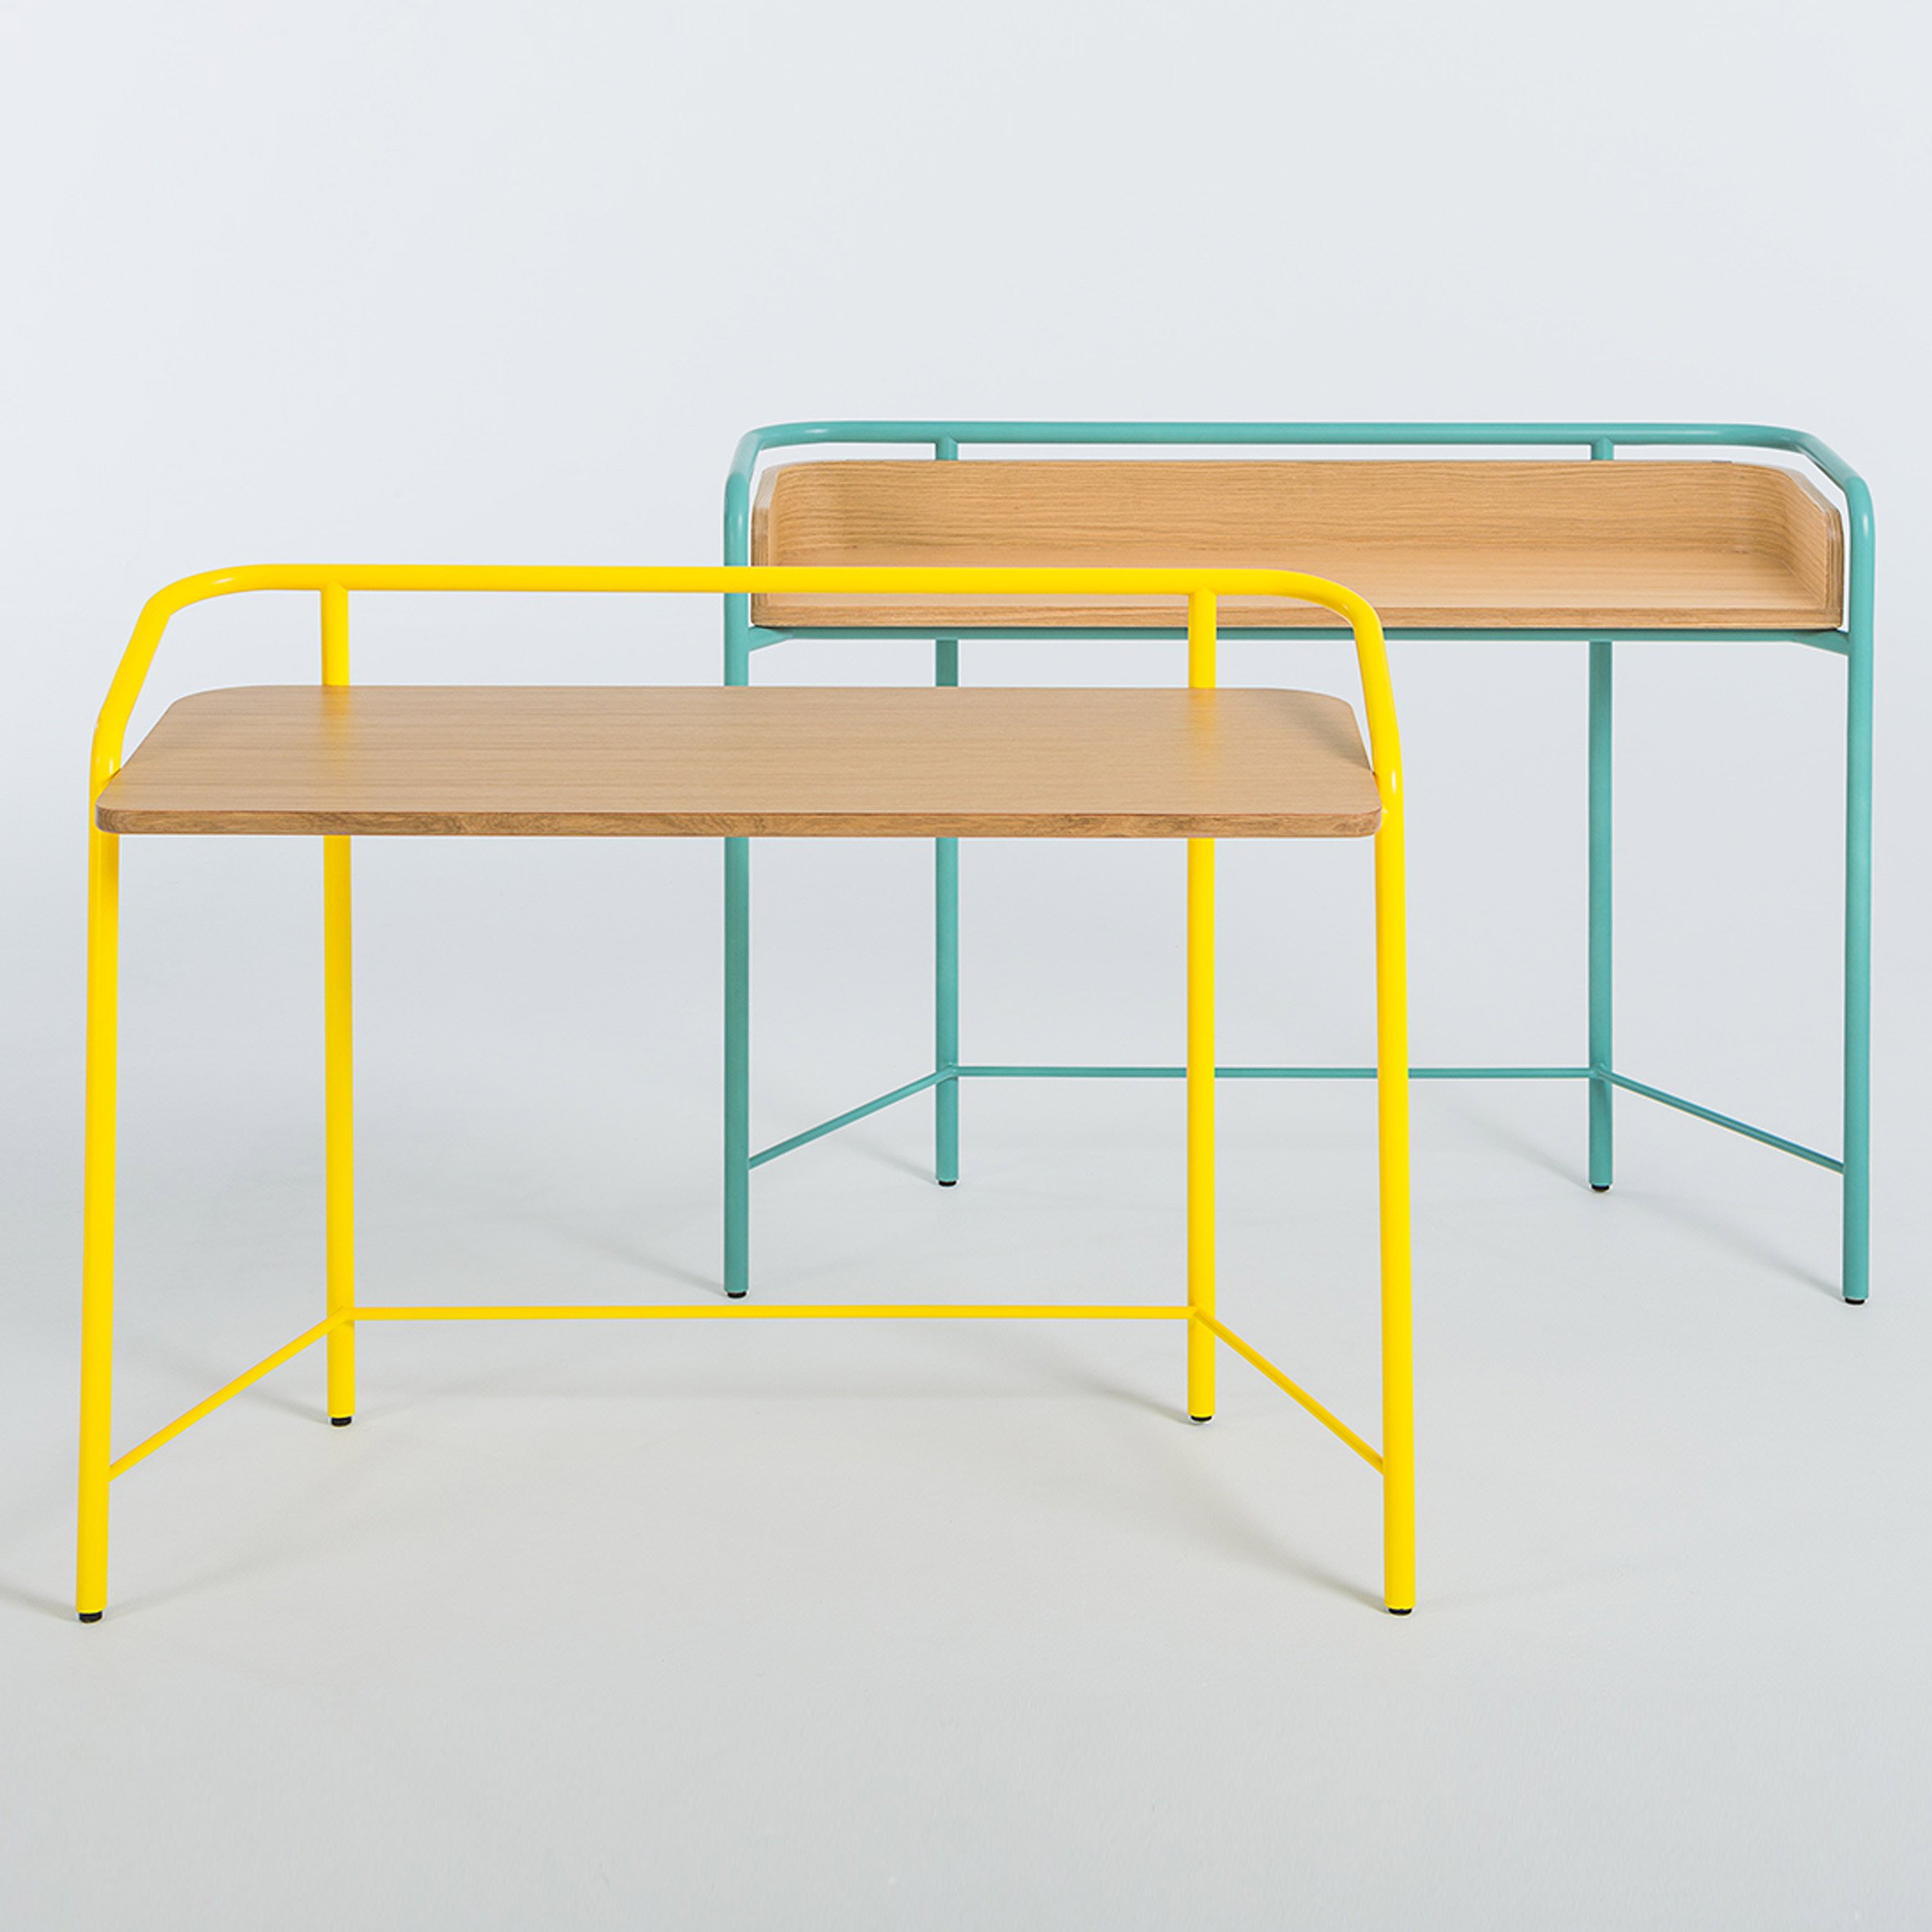 the small desks have the similar colorful parts but these are metal tubes